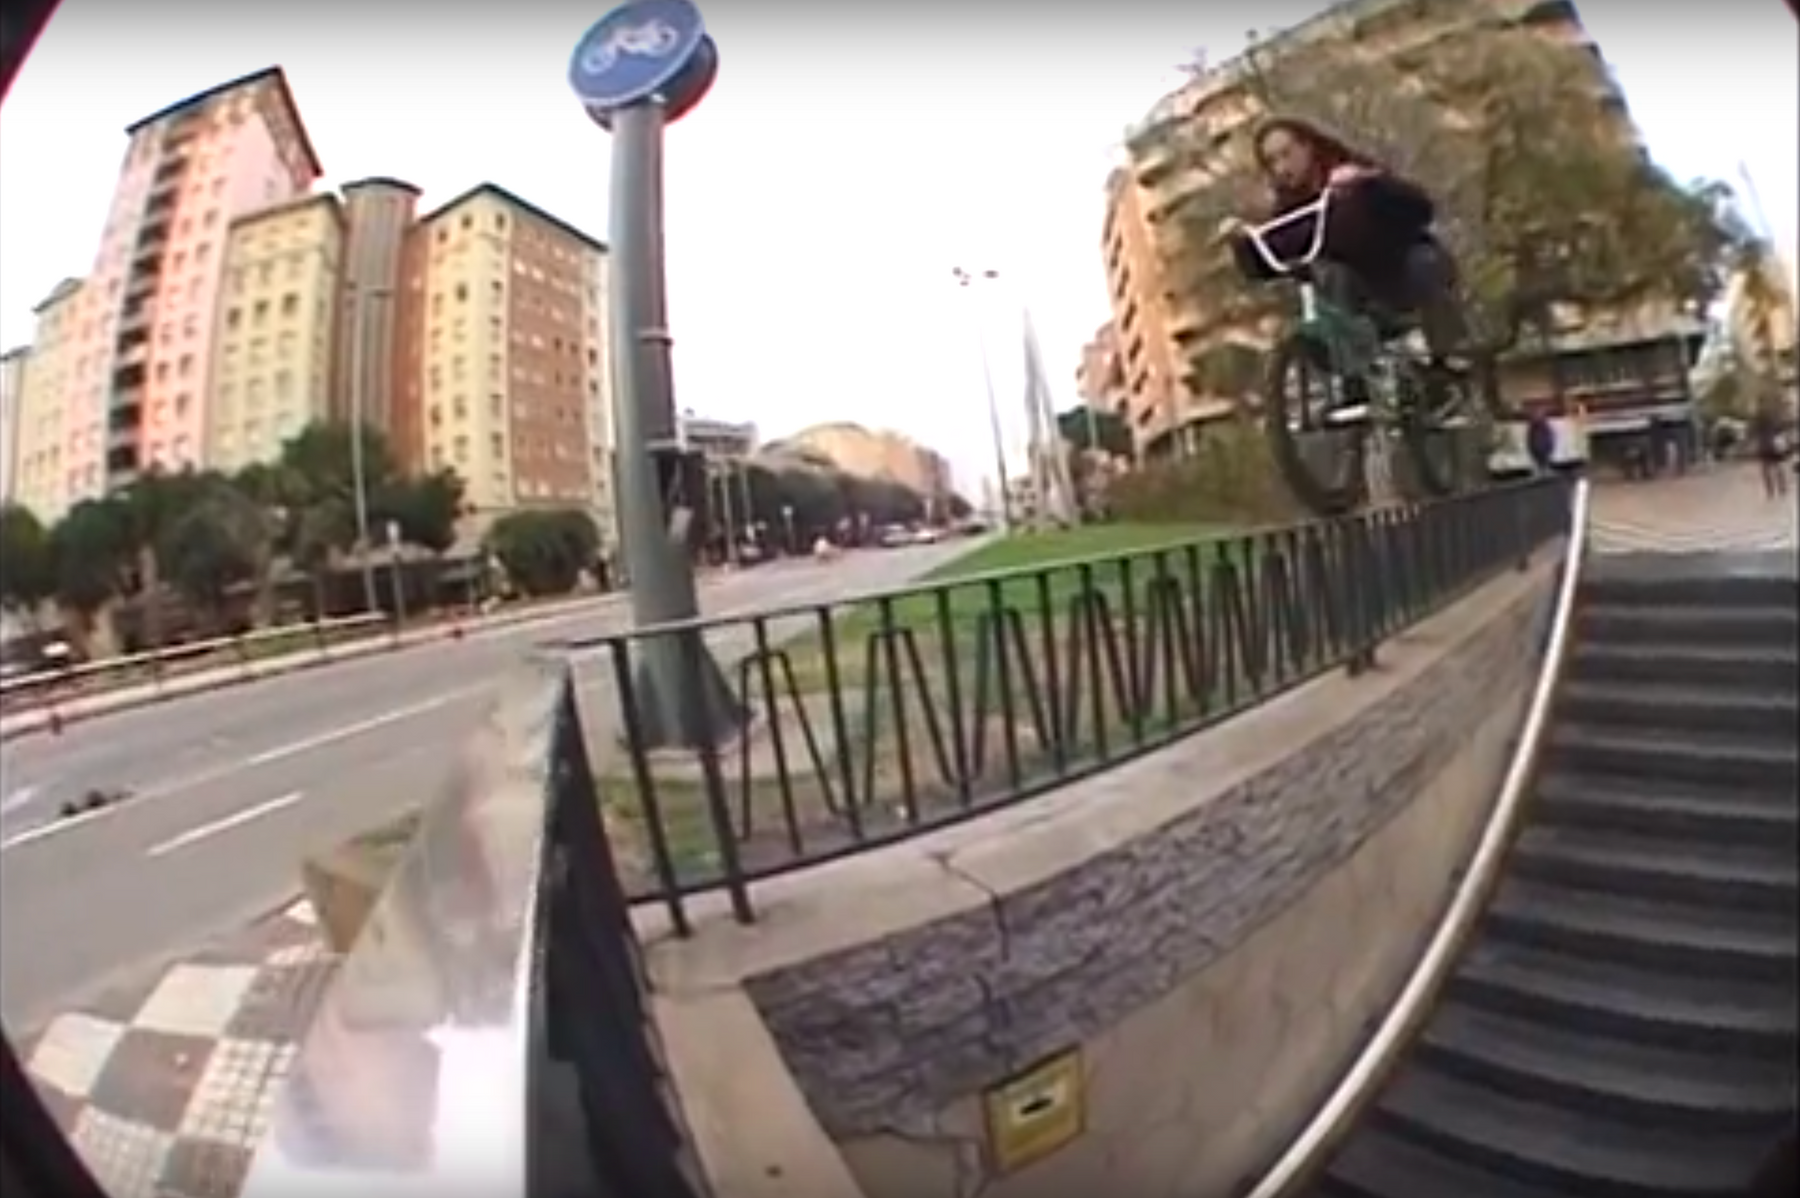 A Nearly Vacation - Anthony Perrin, Joris Coulomb, Alex Kennedy and Co in Barcelona